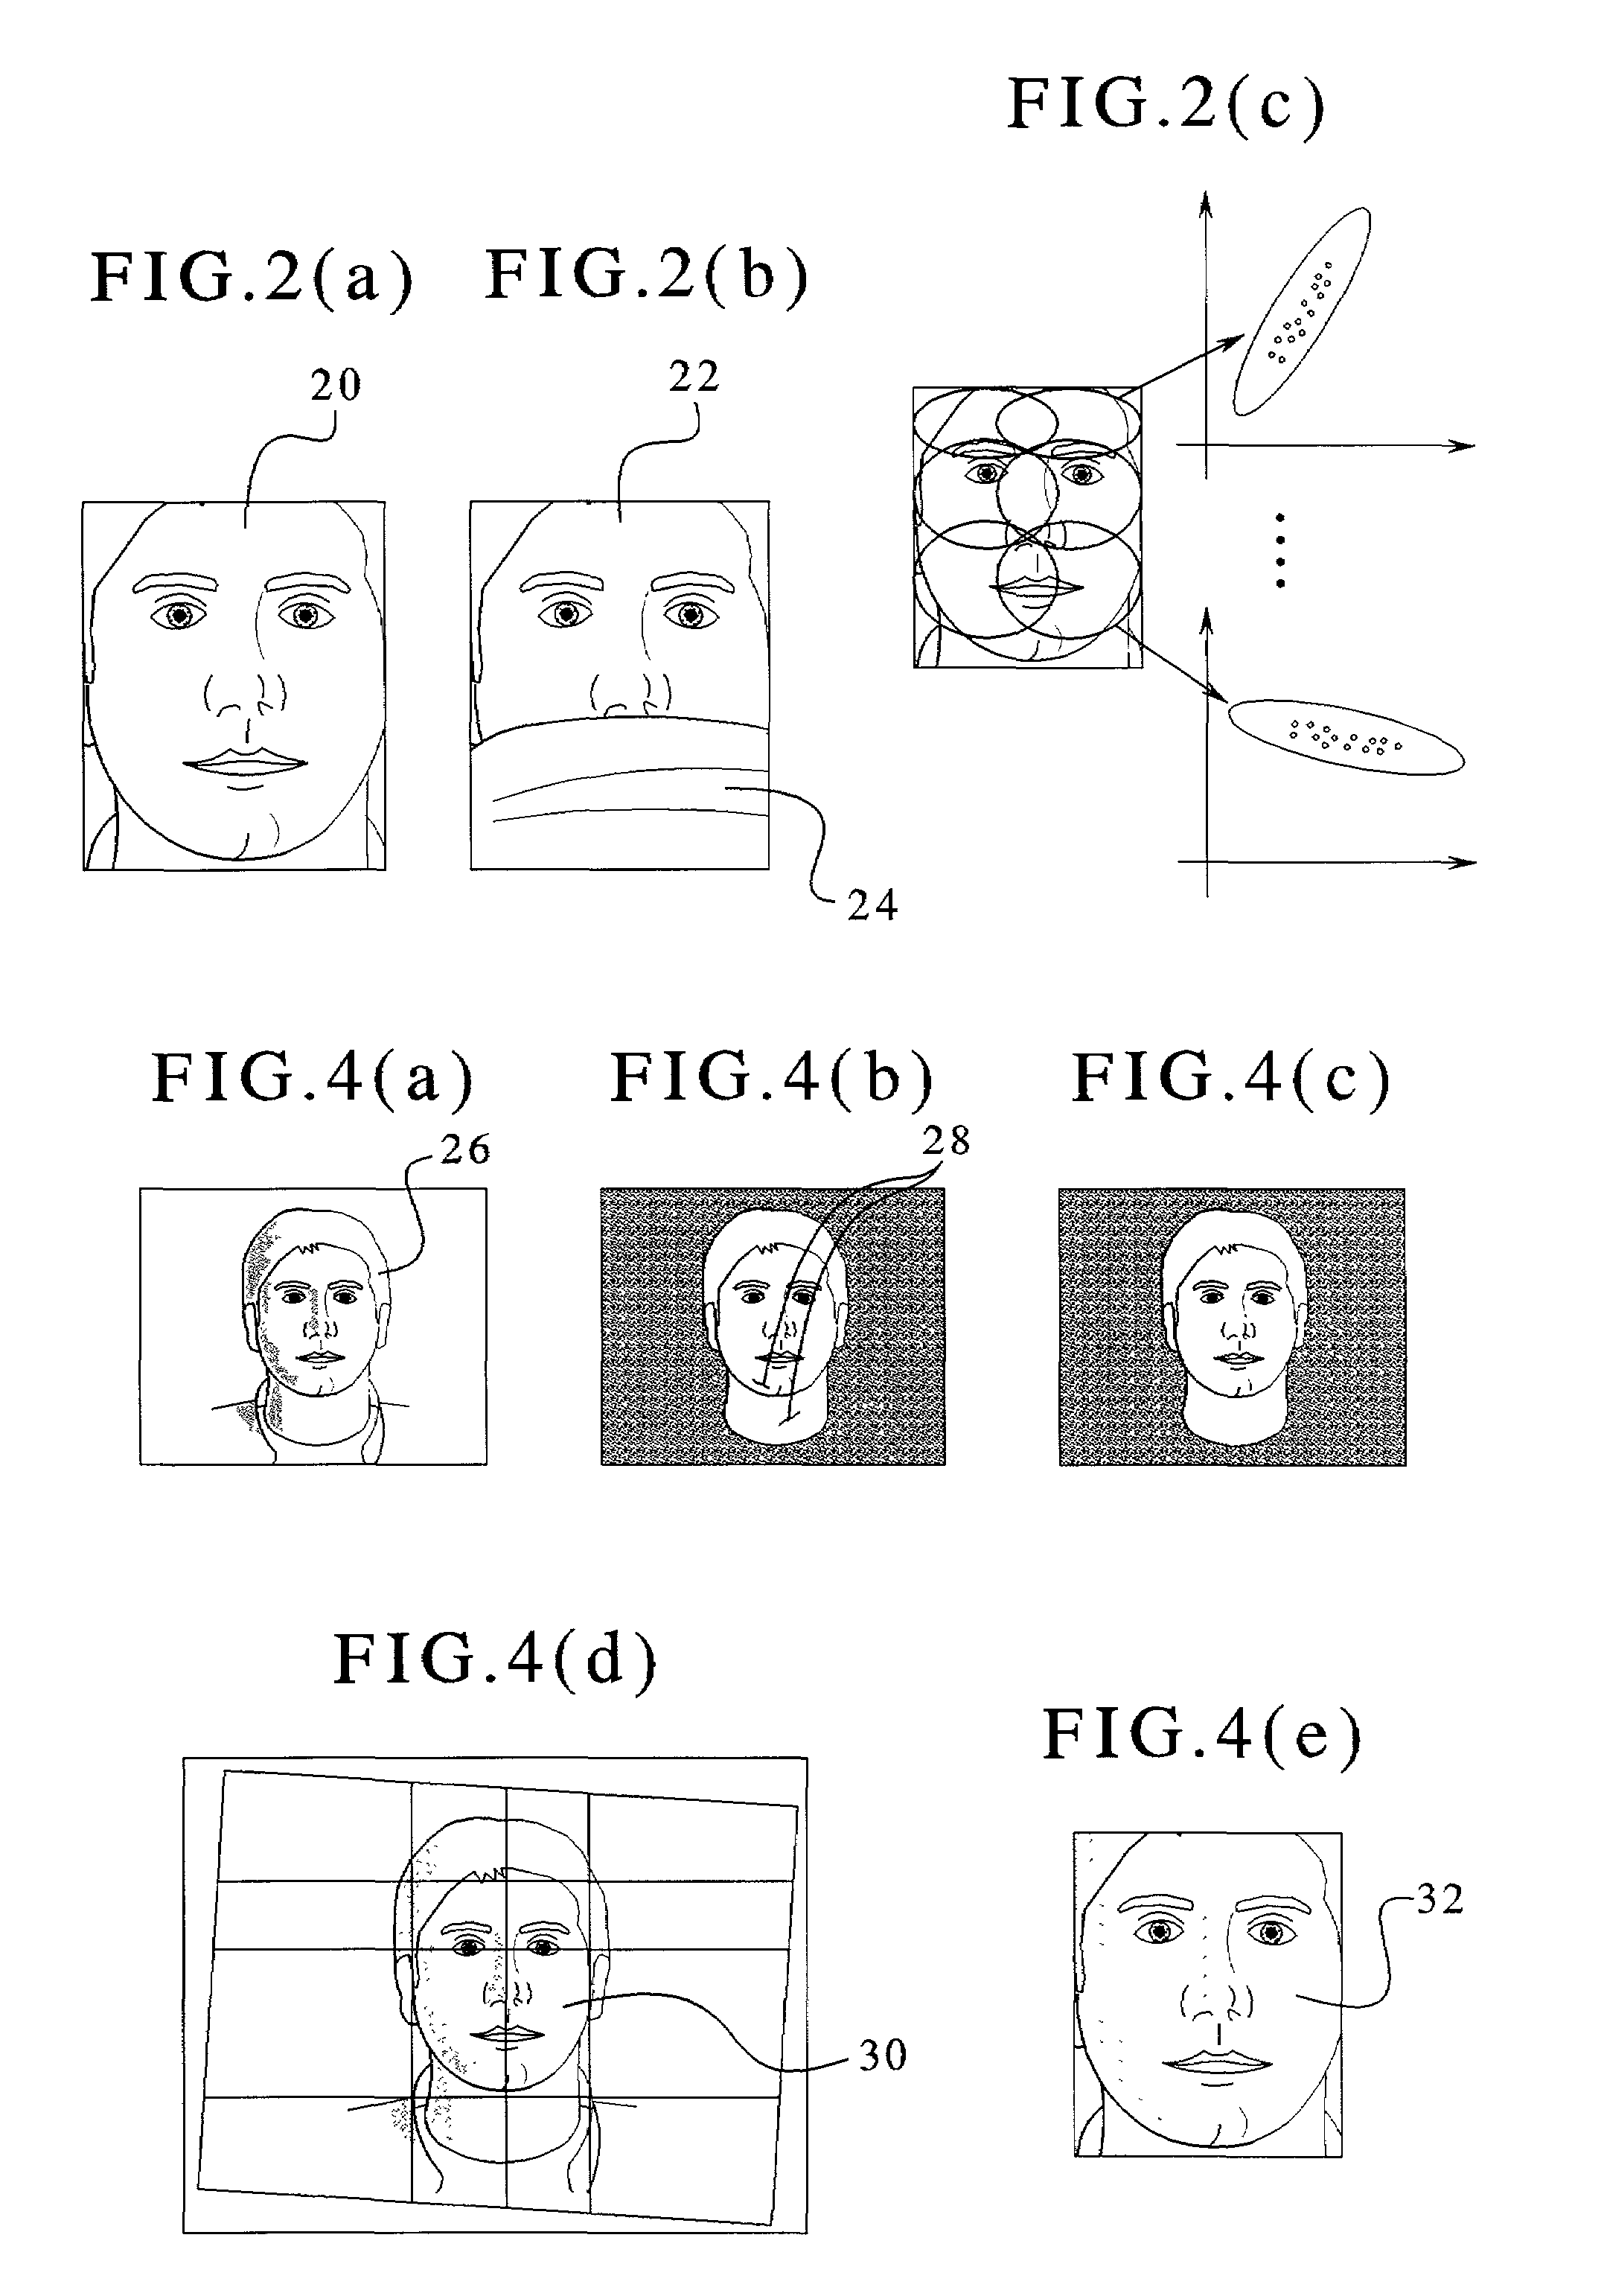 Method of recognizing partially occluded and/or imprecisely localized faces